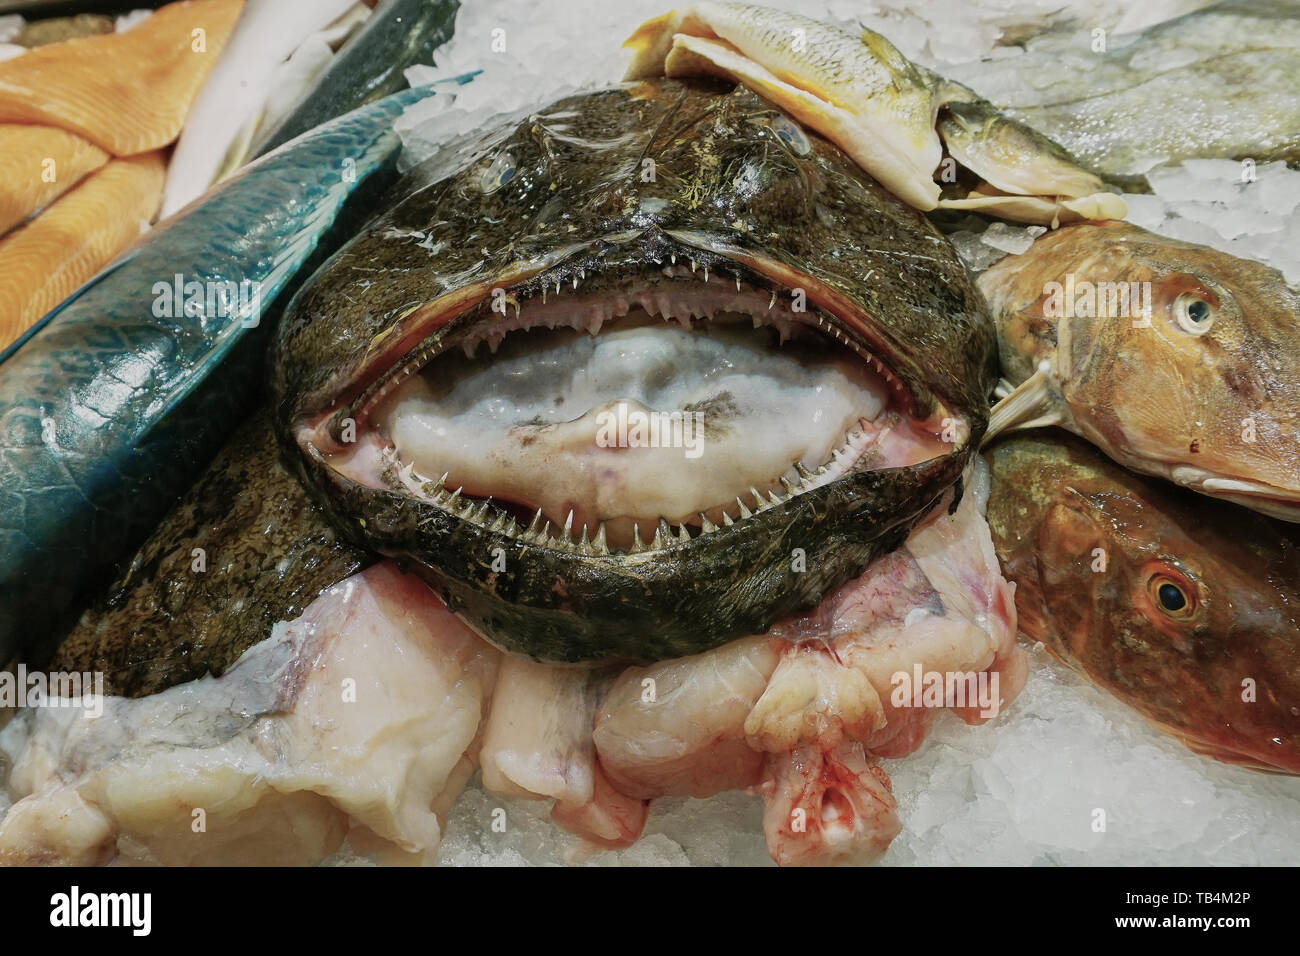 Close up of seafood display with Monk Fish Stock Photo